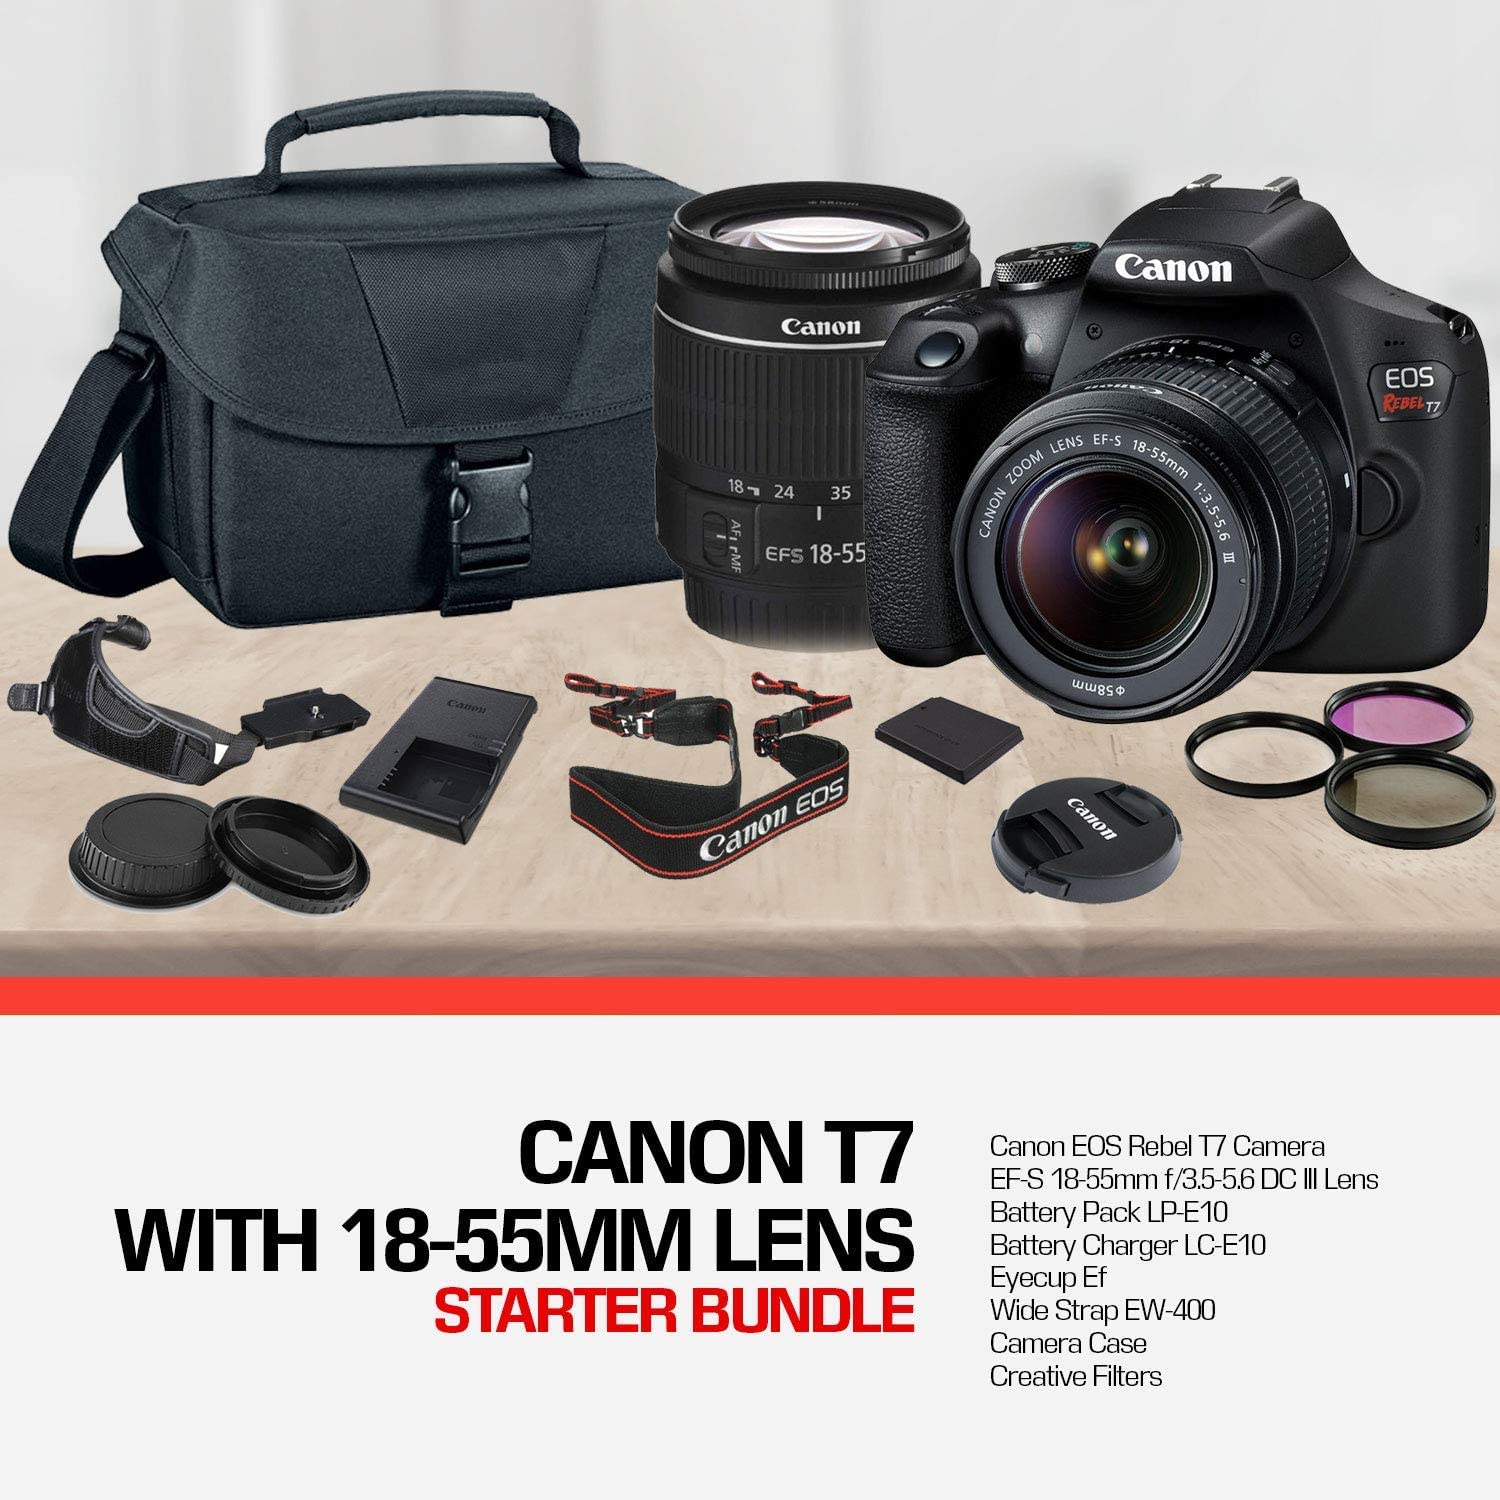 Canon EOS Rebel T7 DSLR Camera with 18-55mm Lens Starter Bundle, Includes: EOS Bag, Sandisk Ultra 64GB Card, Clean and Care Kit + More